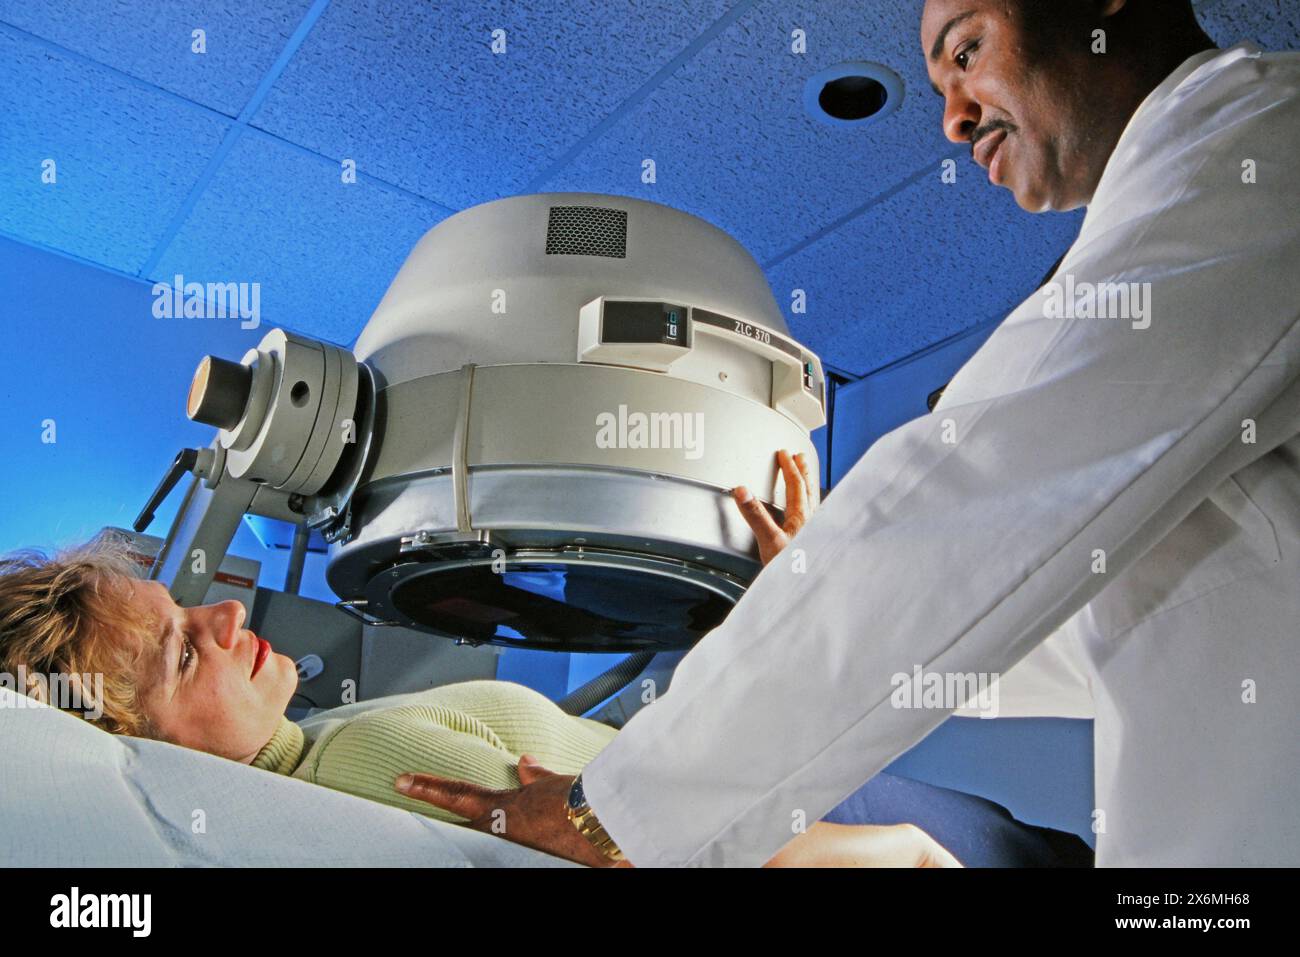 A doctor in medical attire is preparing a woman for a diagnostic procedure. The doctor appears focused as they assess the patients condition and provi Stock Photo